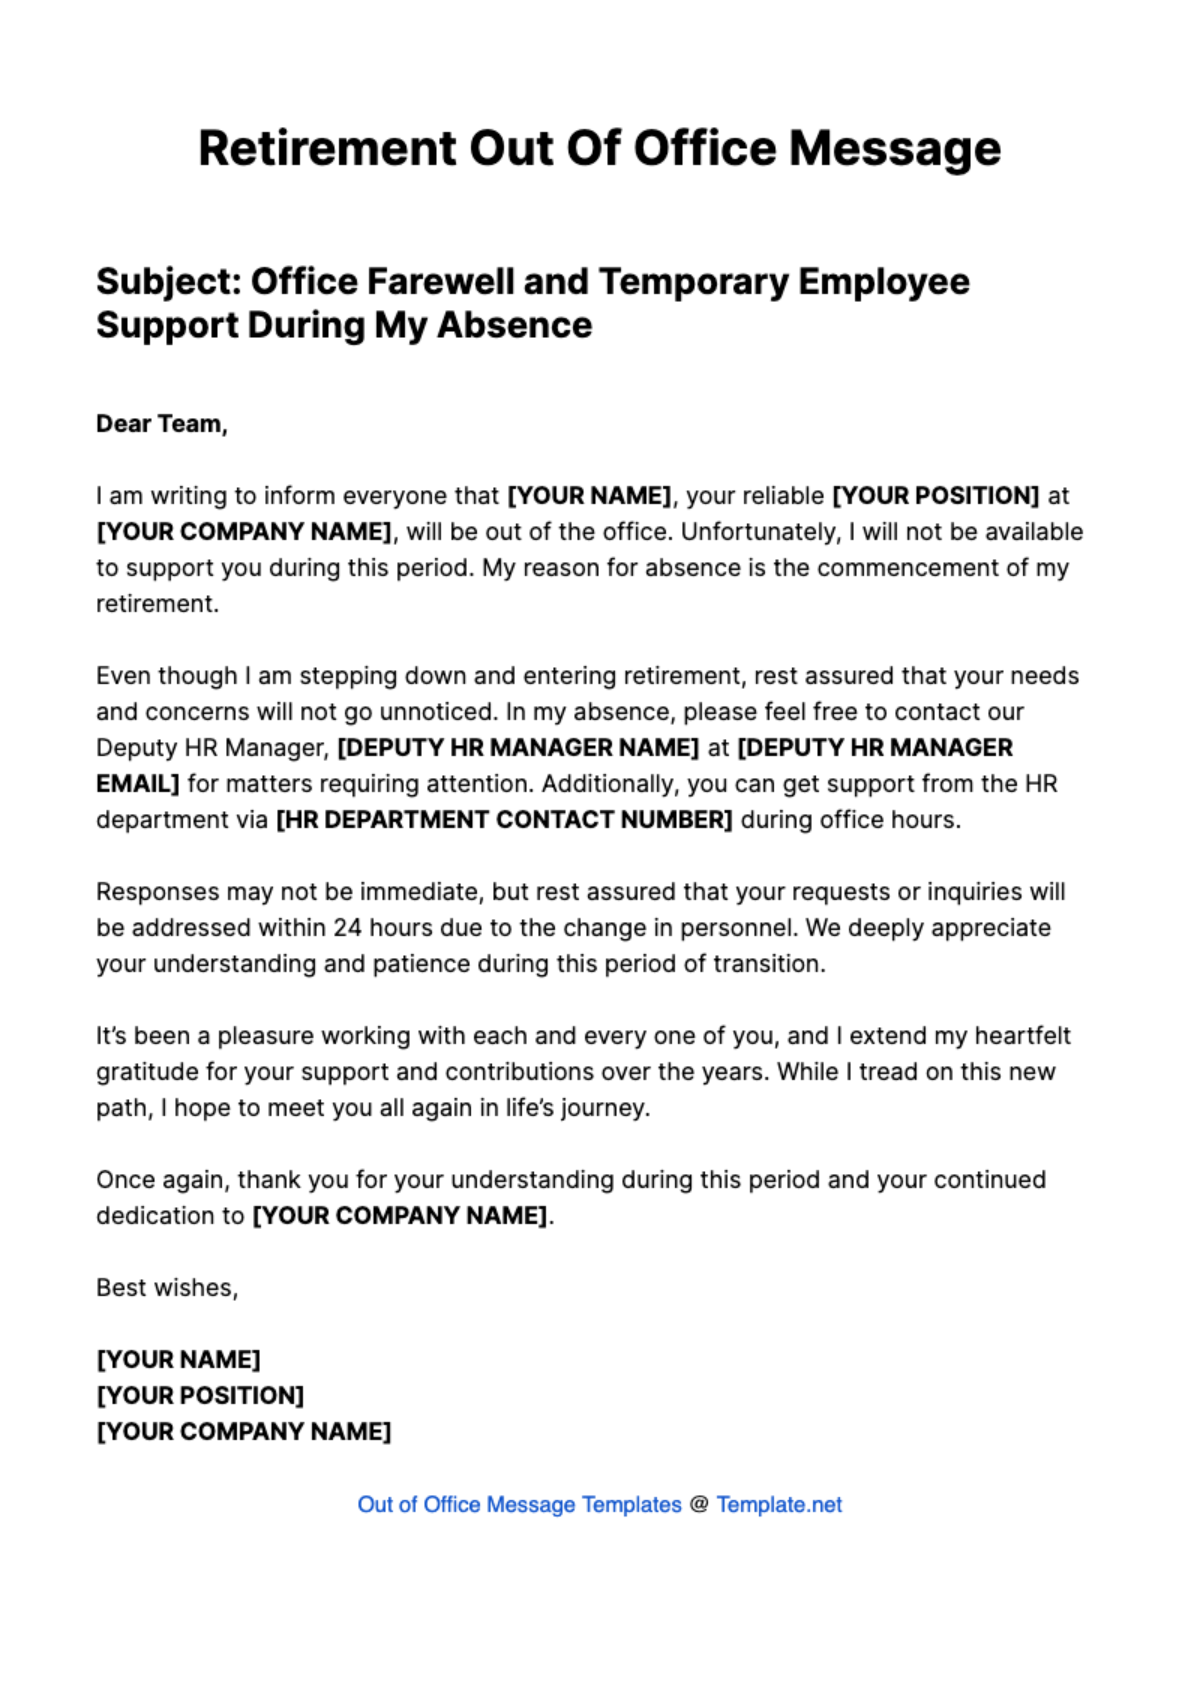 Retirement Out Of Office Message Template